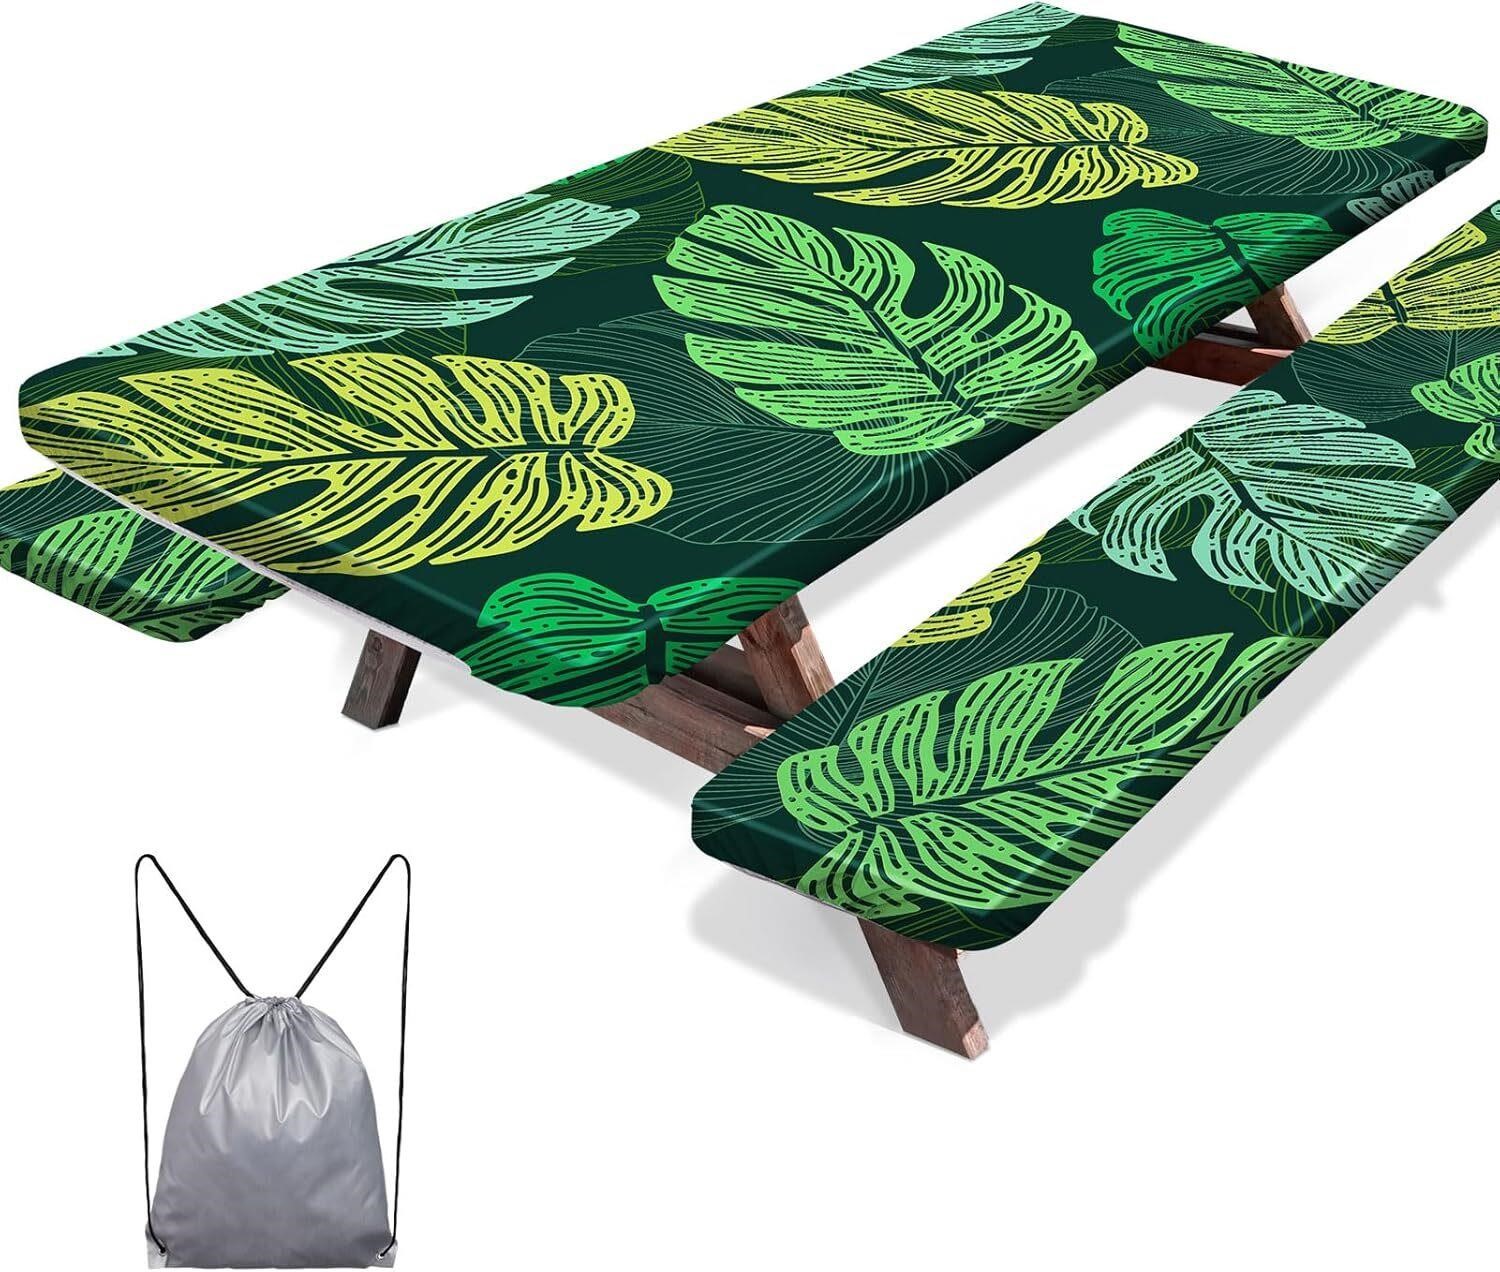 MHJY Picnic Table Cover with Bench Covers 8 Ft